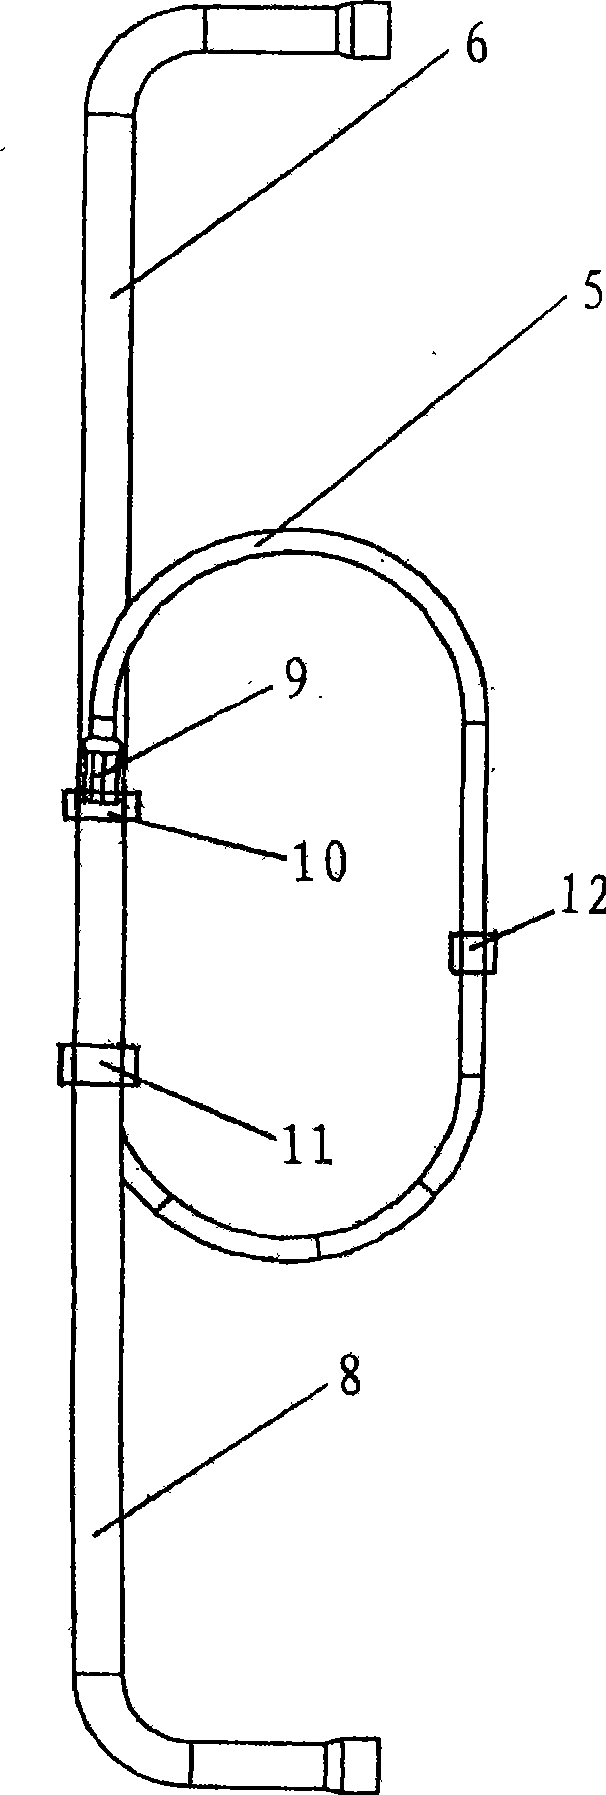 Throttle capillary tube fixing structure of air conditioner